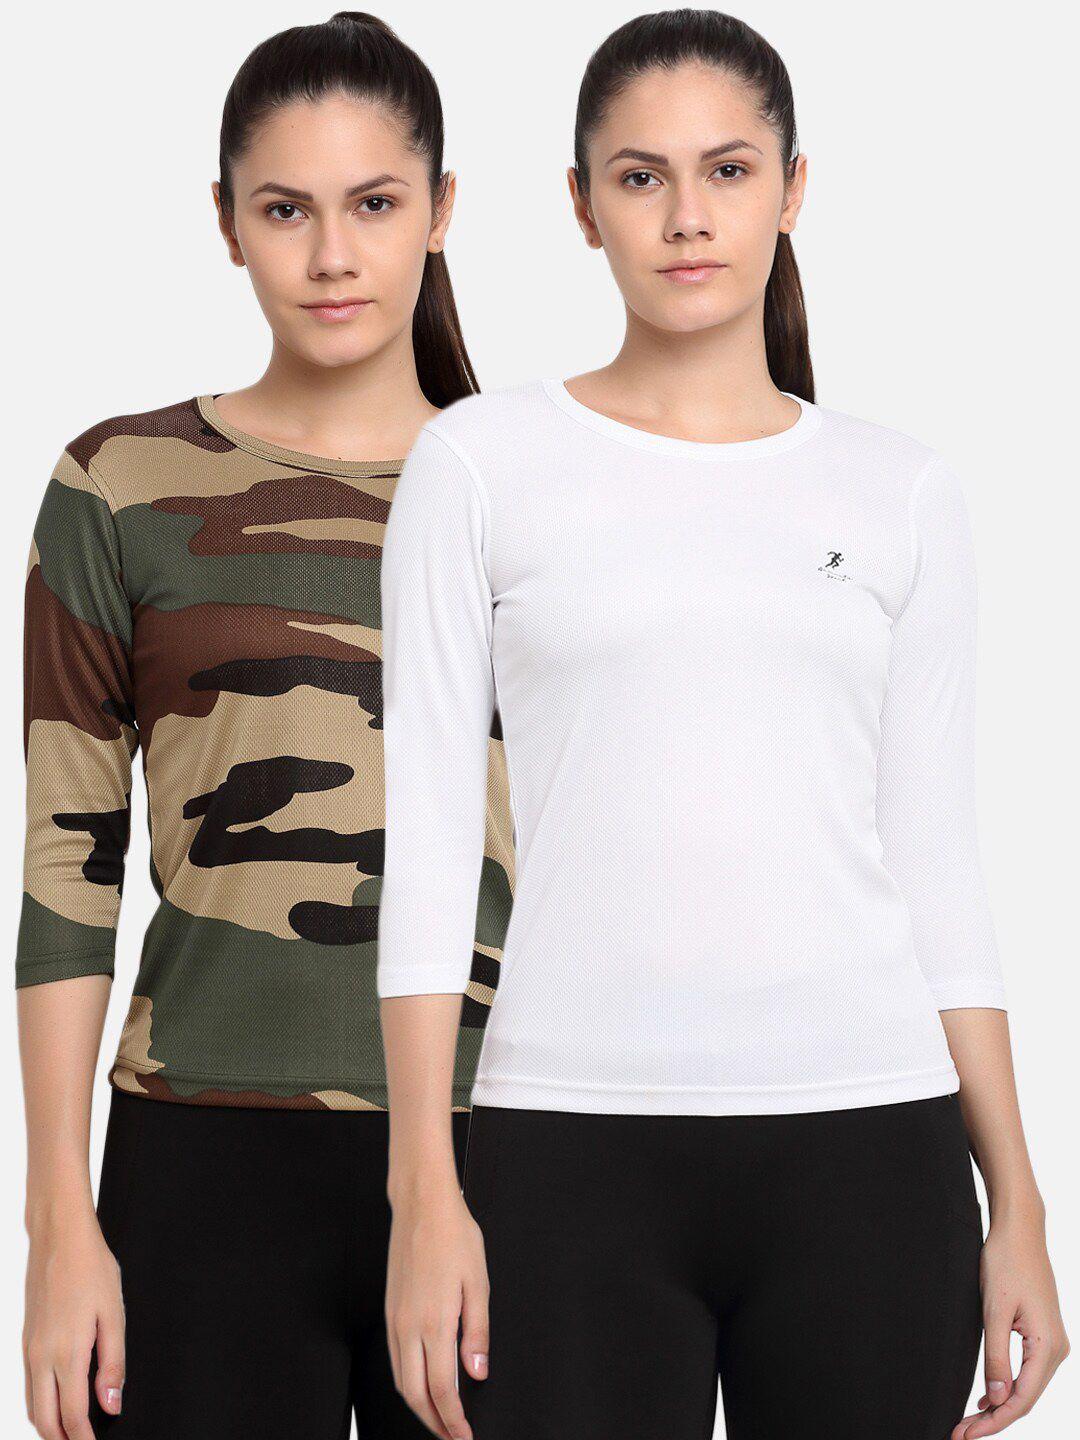 armisto women pack of 2 olive green & white dri-fit slim fit training or gym t-shirt